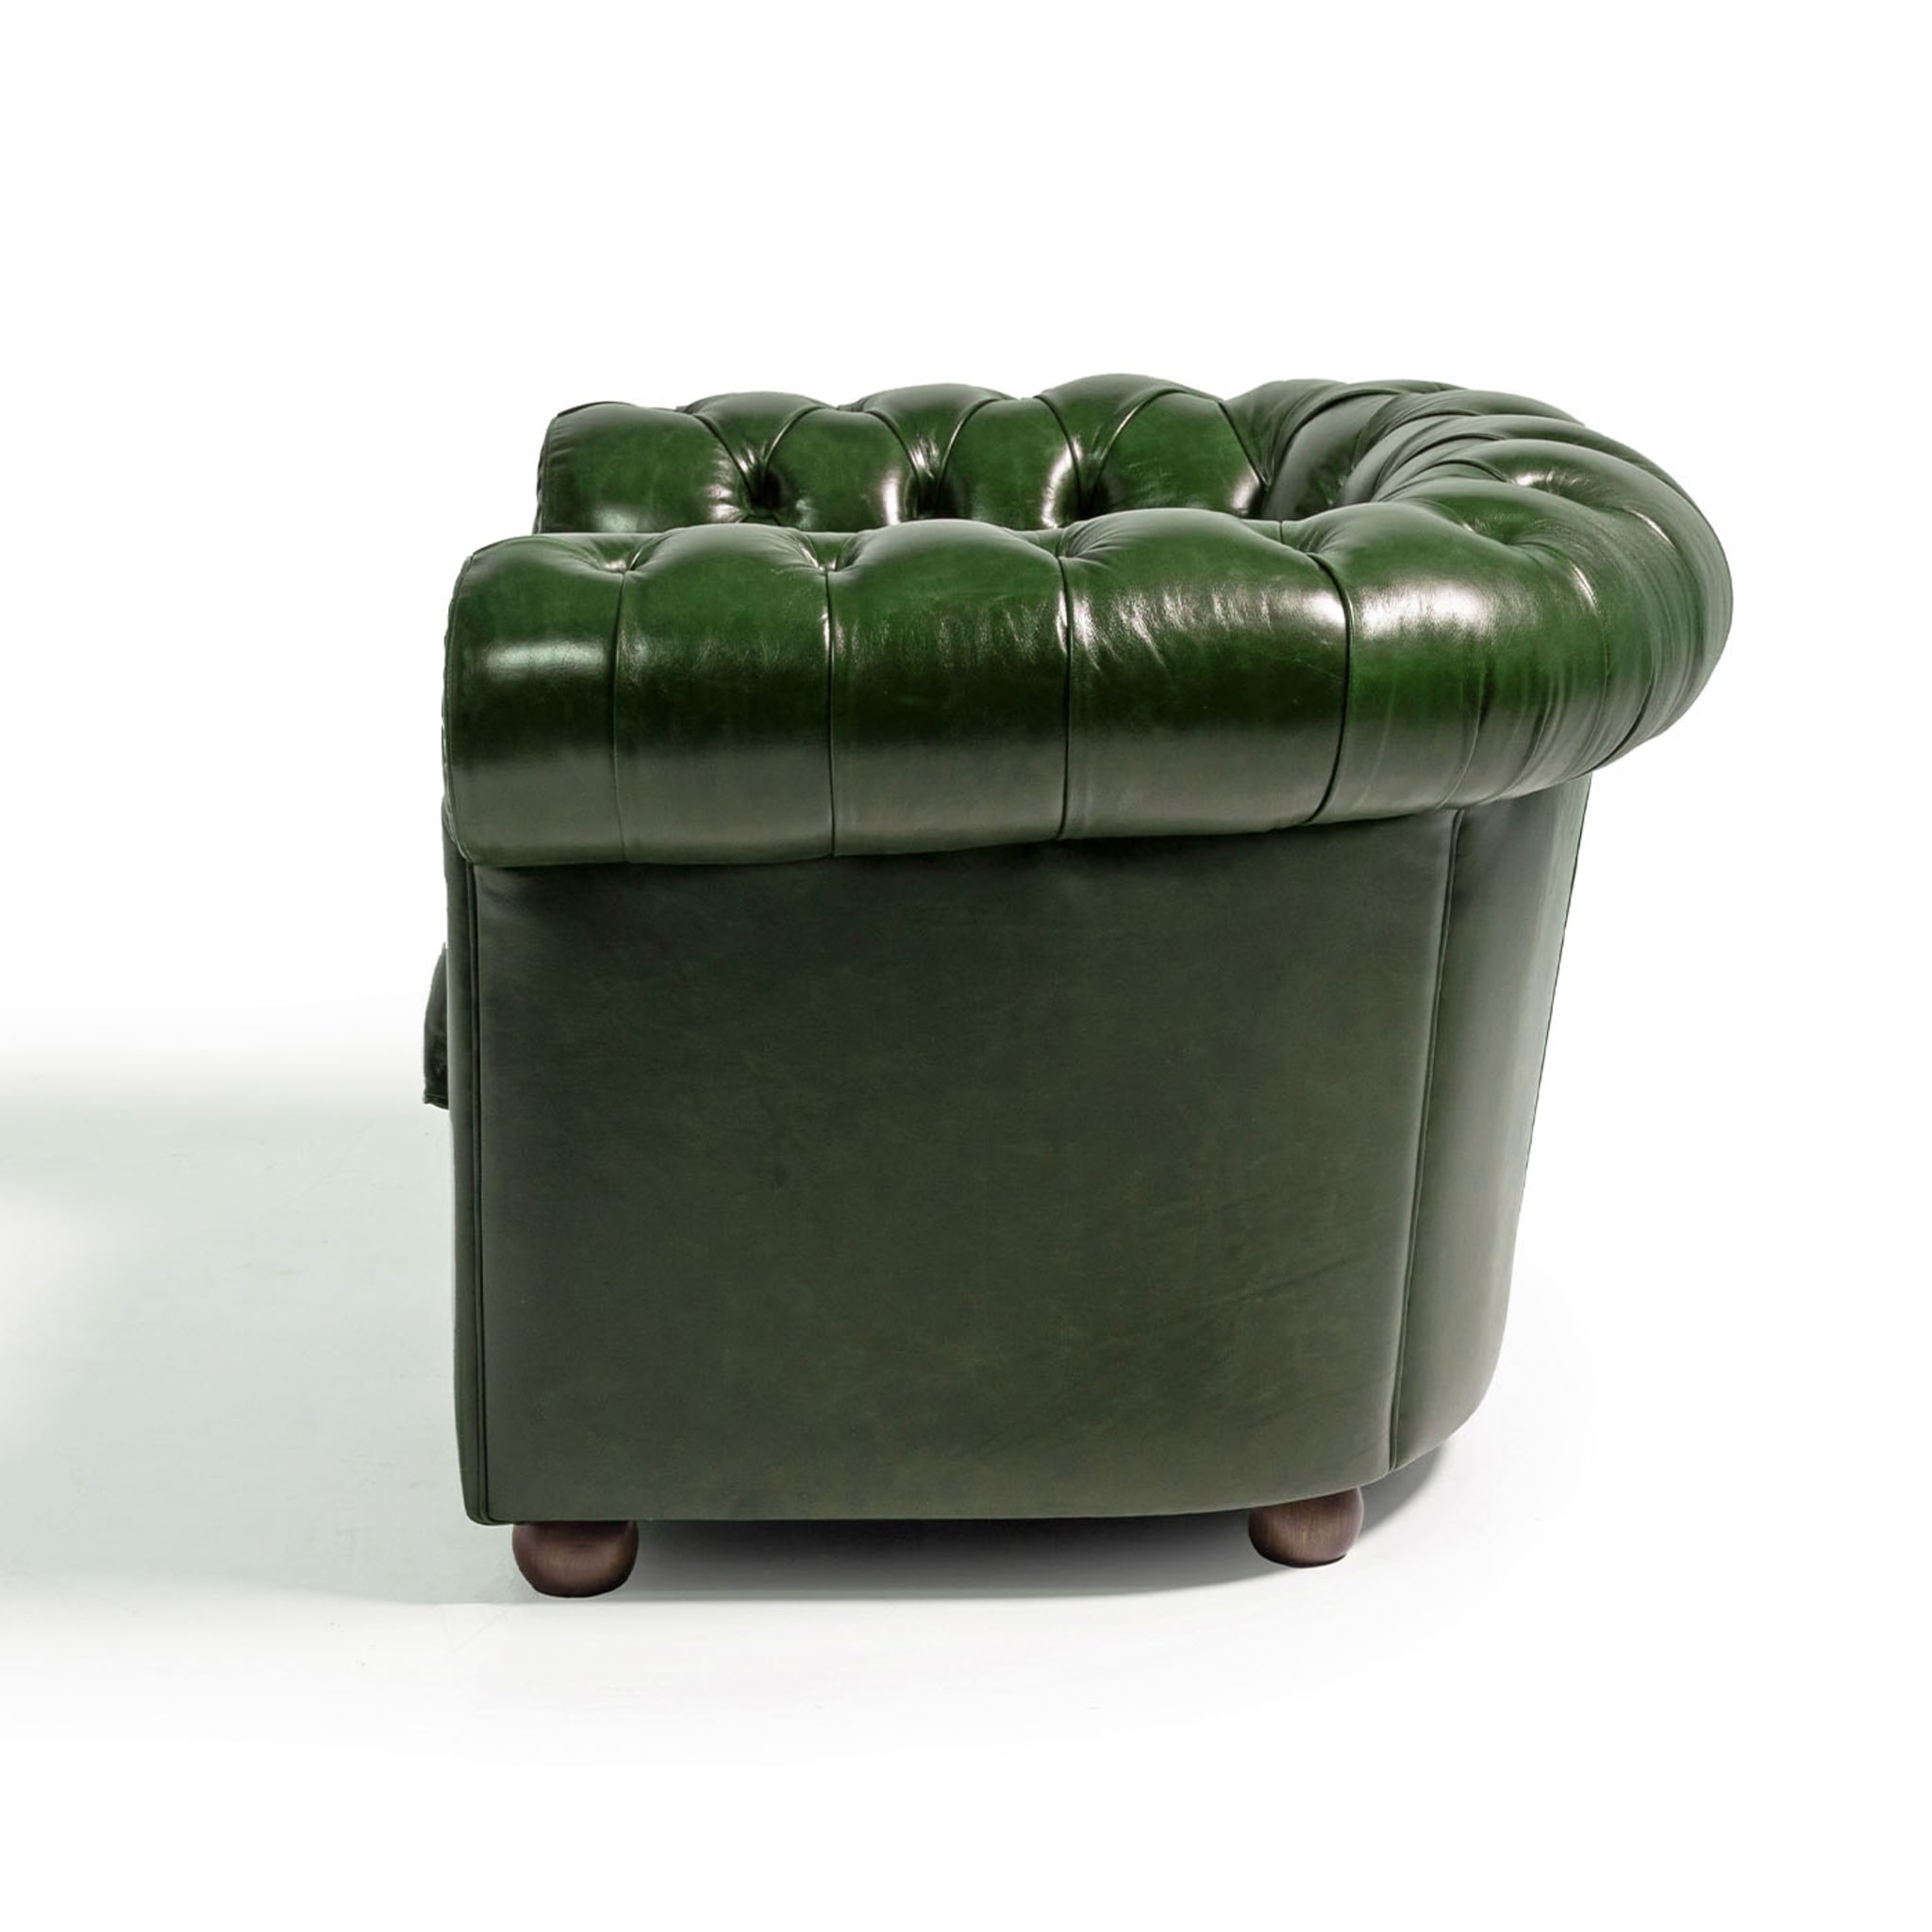 Chesterfield Green Leather Armchair - Alternative view 2